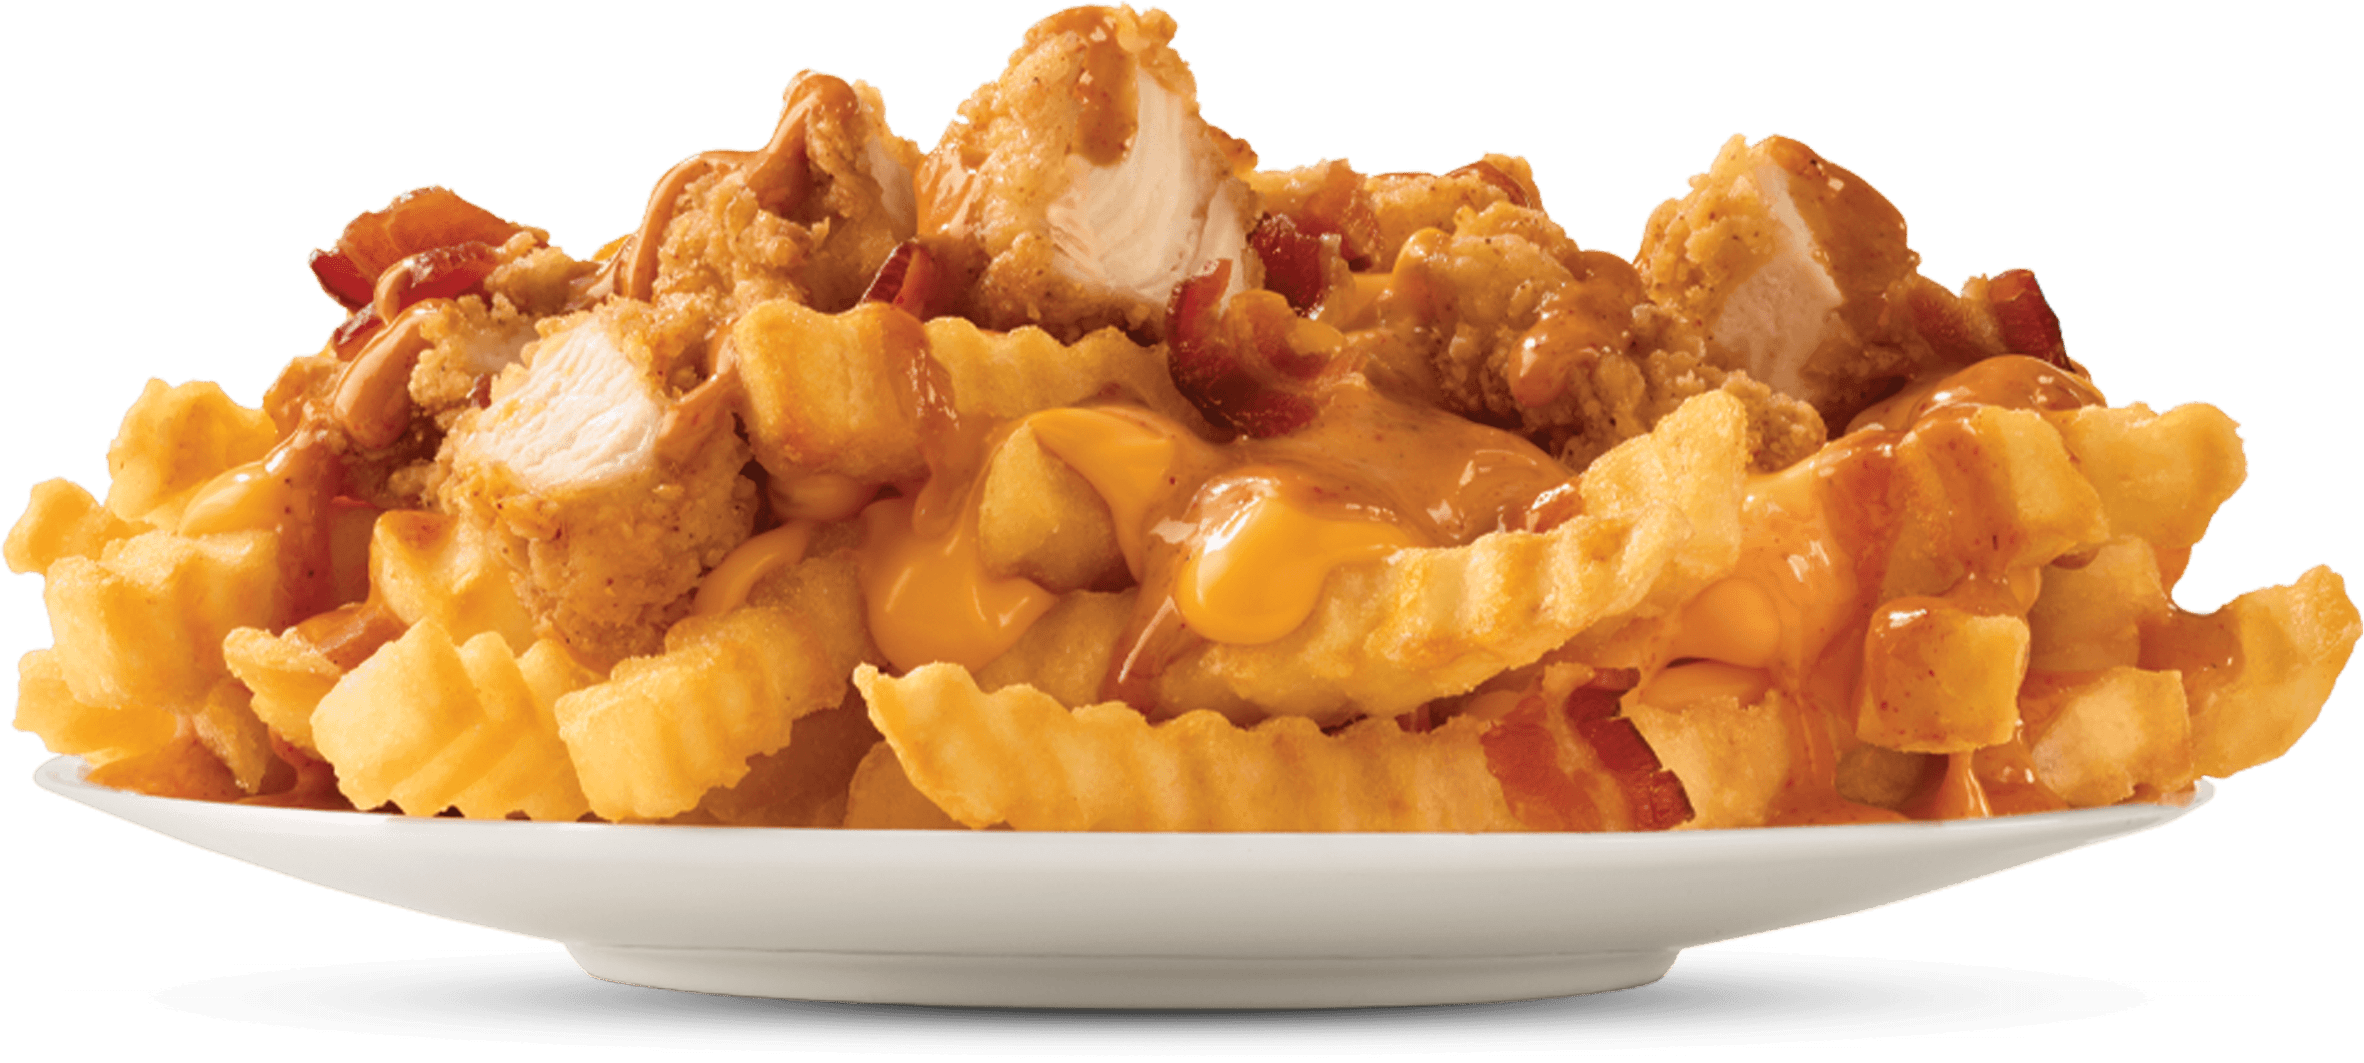 Arby's Loaded Fries Nutrition Facts